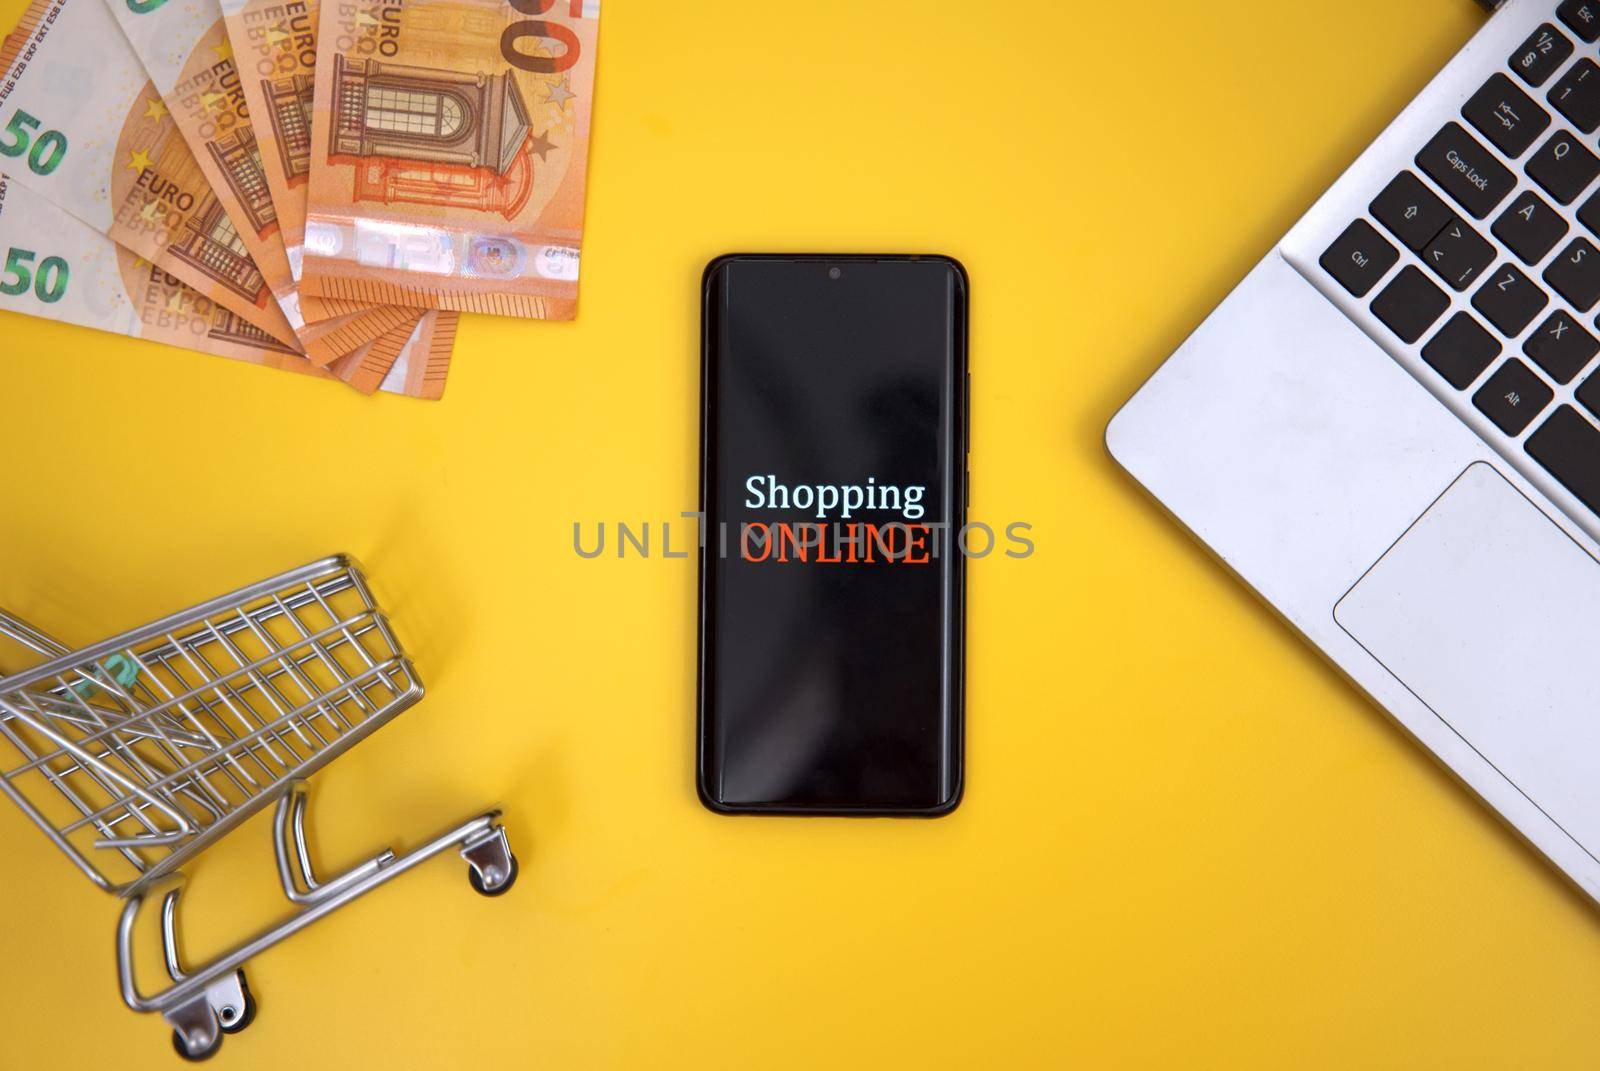 Mobile phone, shopping cart and money. Online shopping concept. by dmitrimaruta